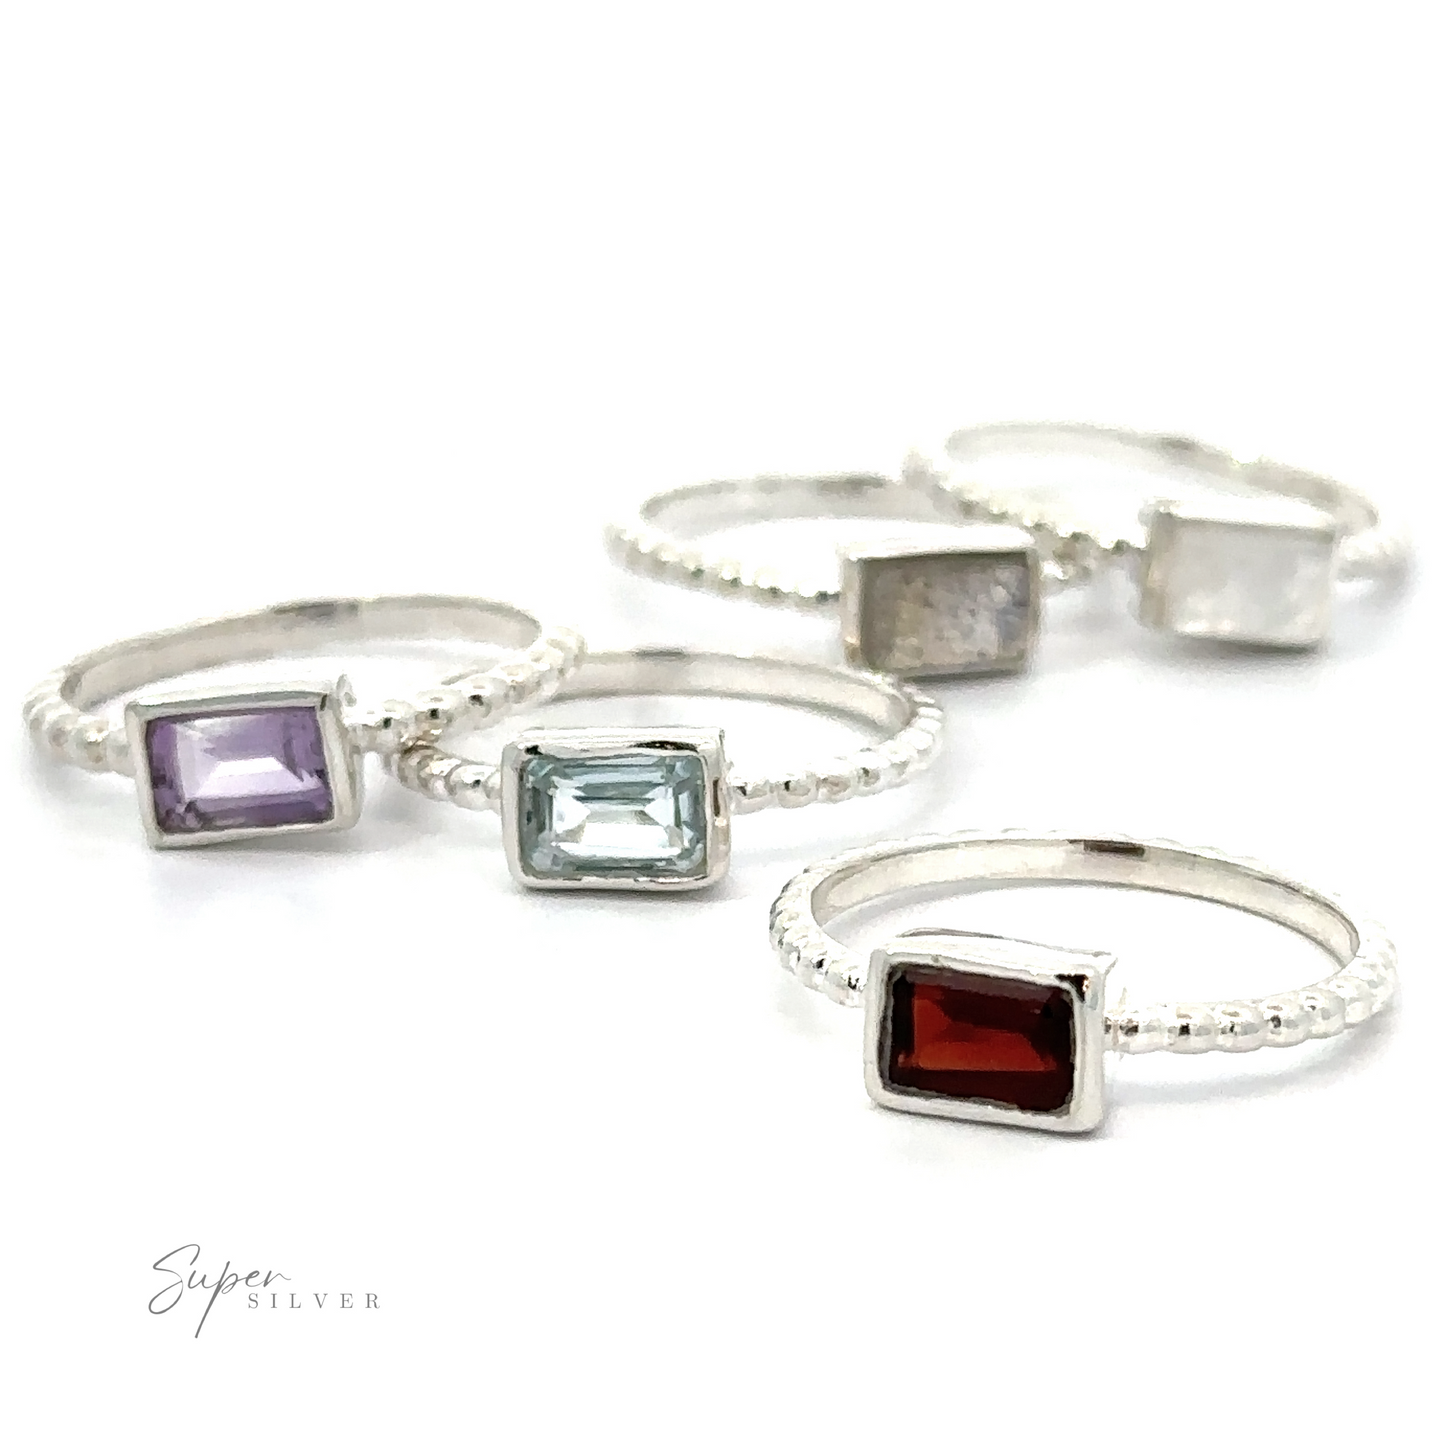 A collection of .925 Sterling Silver Rectangular Gemstone Rings with Beaded Bands, including amethyst, displayed on a white background.